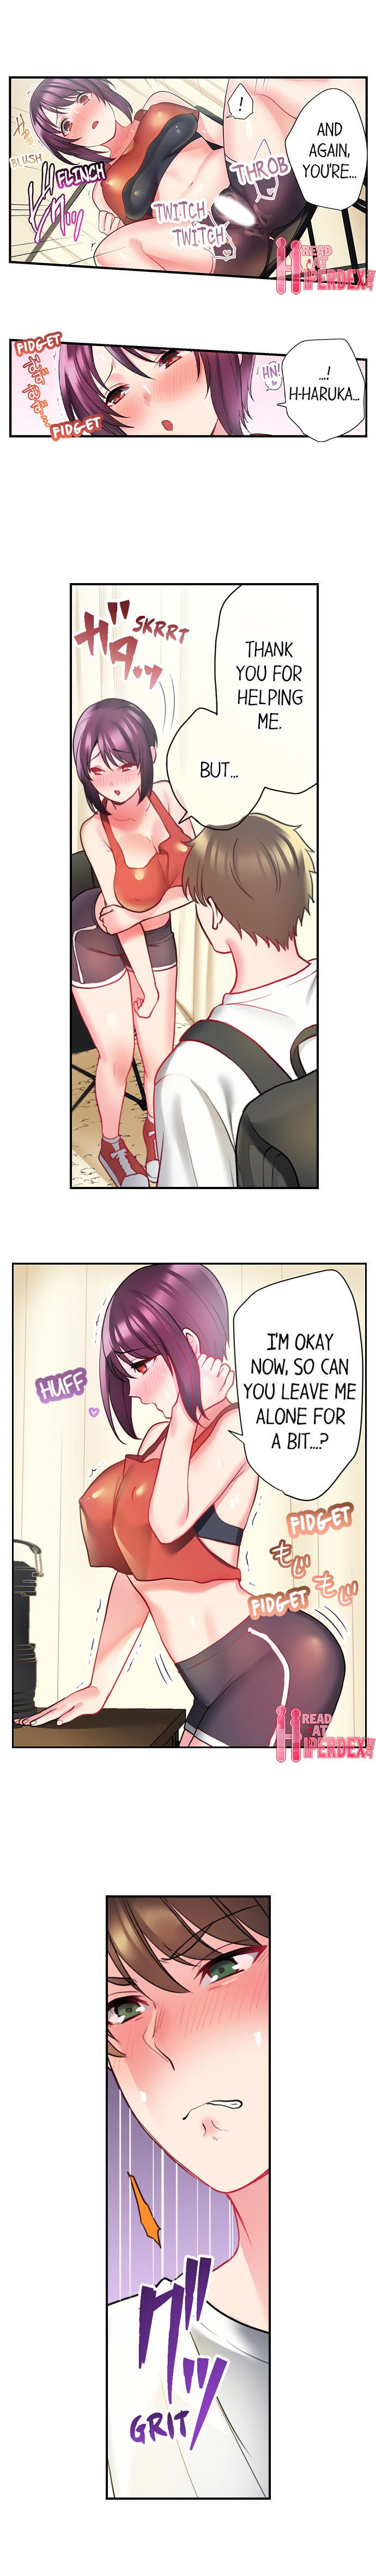 Bike Delivery Girl, Cumming To Your Door! - Chapter 5 Page 4